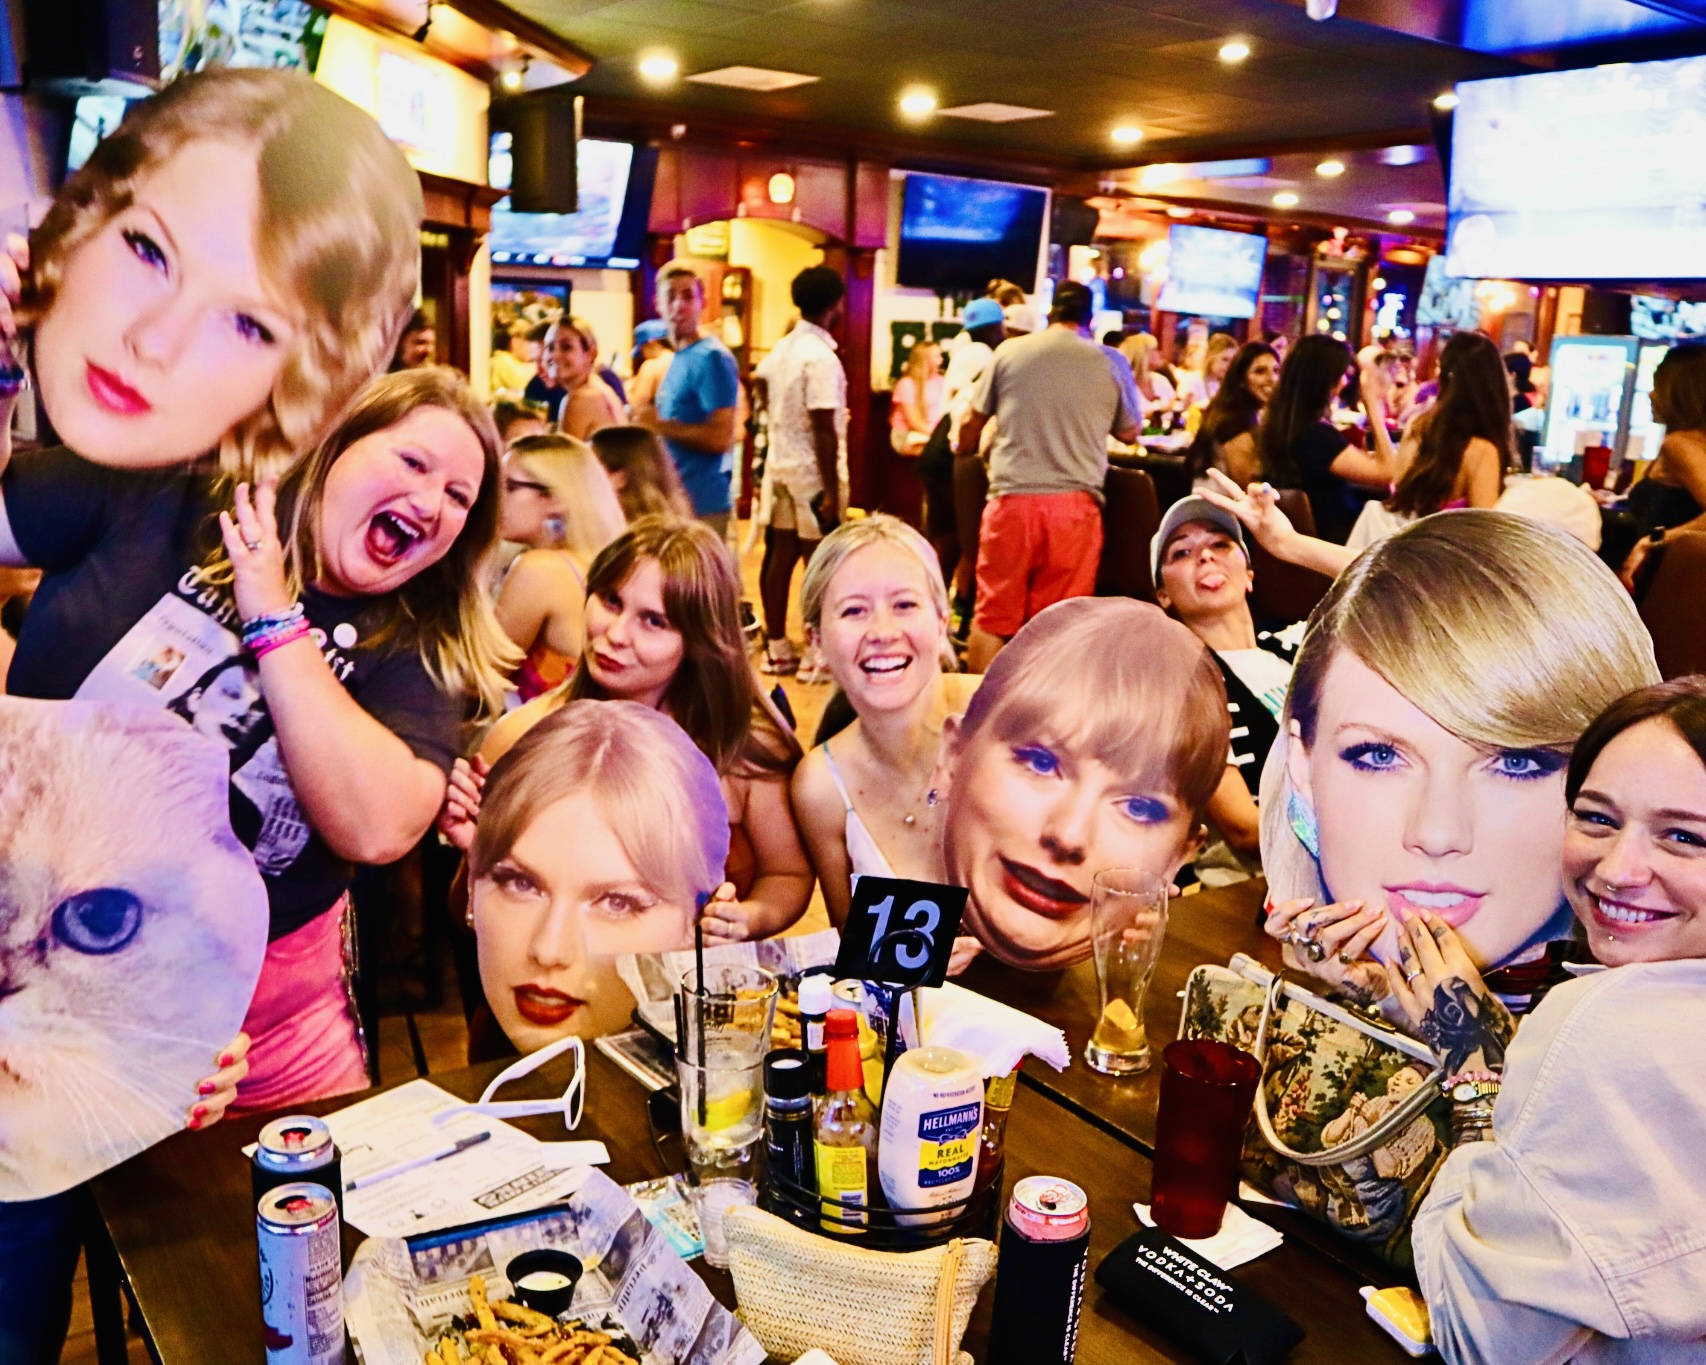 Trivia NationTaylor Swift Theme Night at The Brix Taphouse